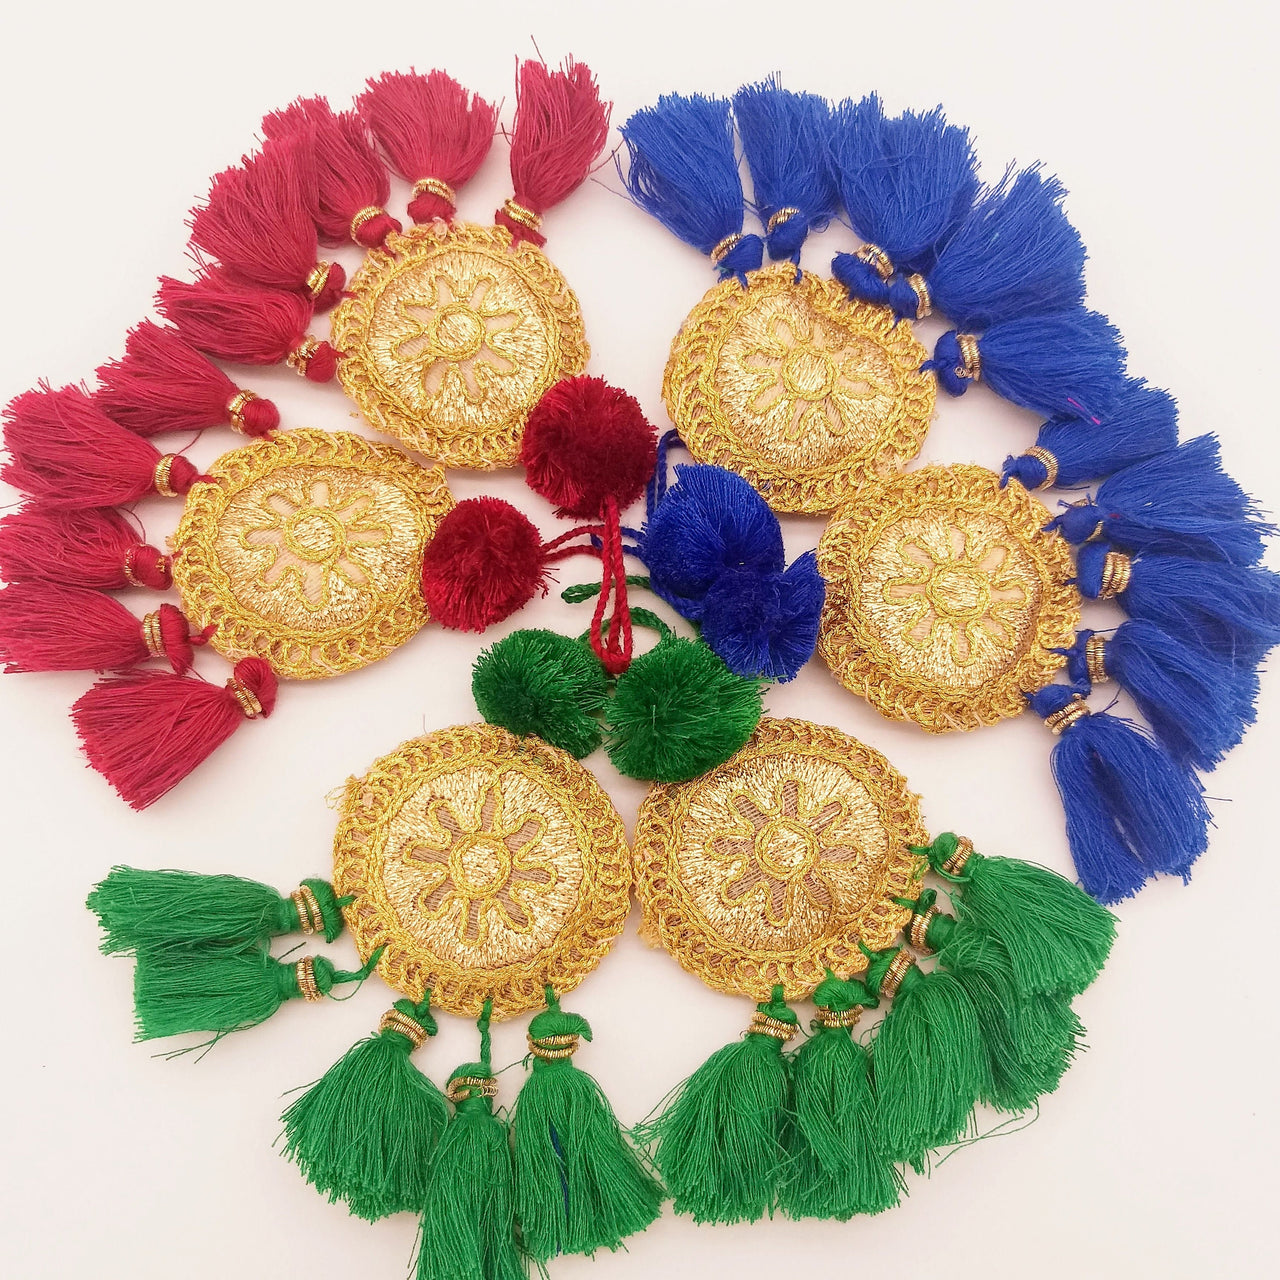 Set of 2 Embroidered Tassels, Royal Blue and Gold Tassels, Indian Tassels